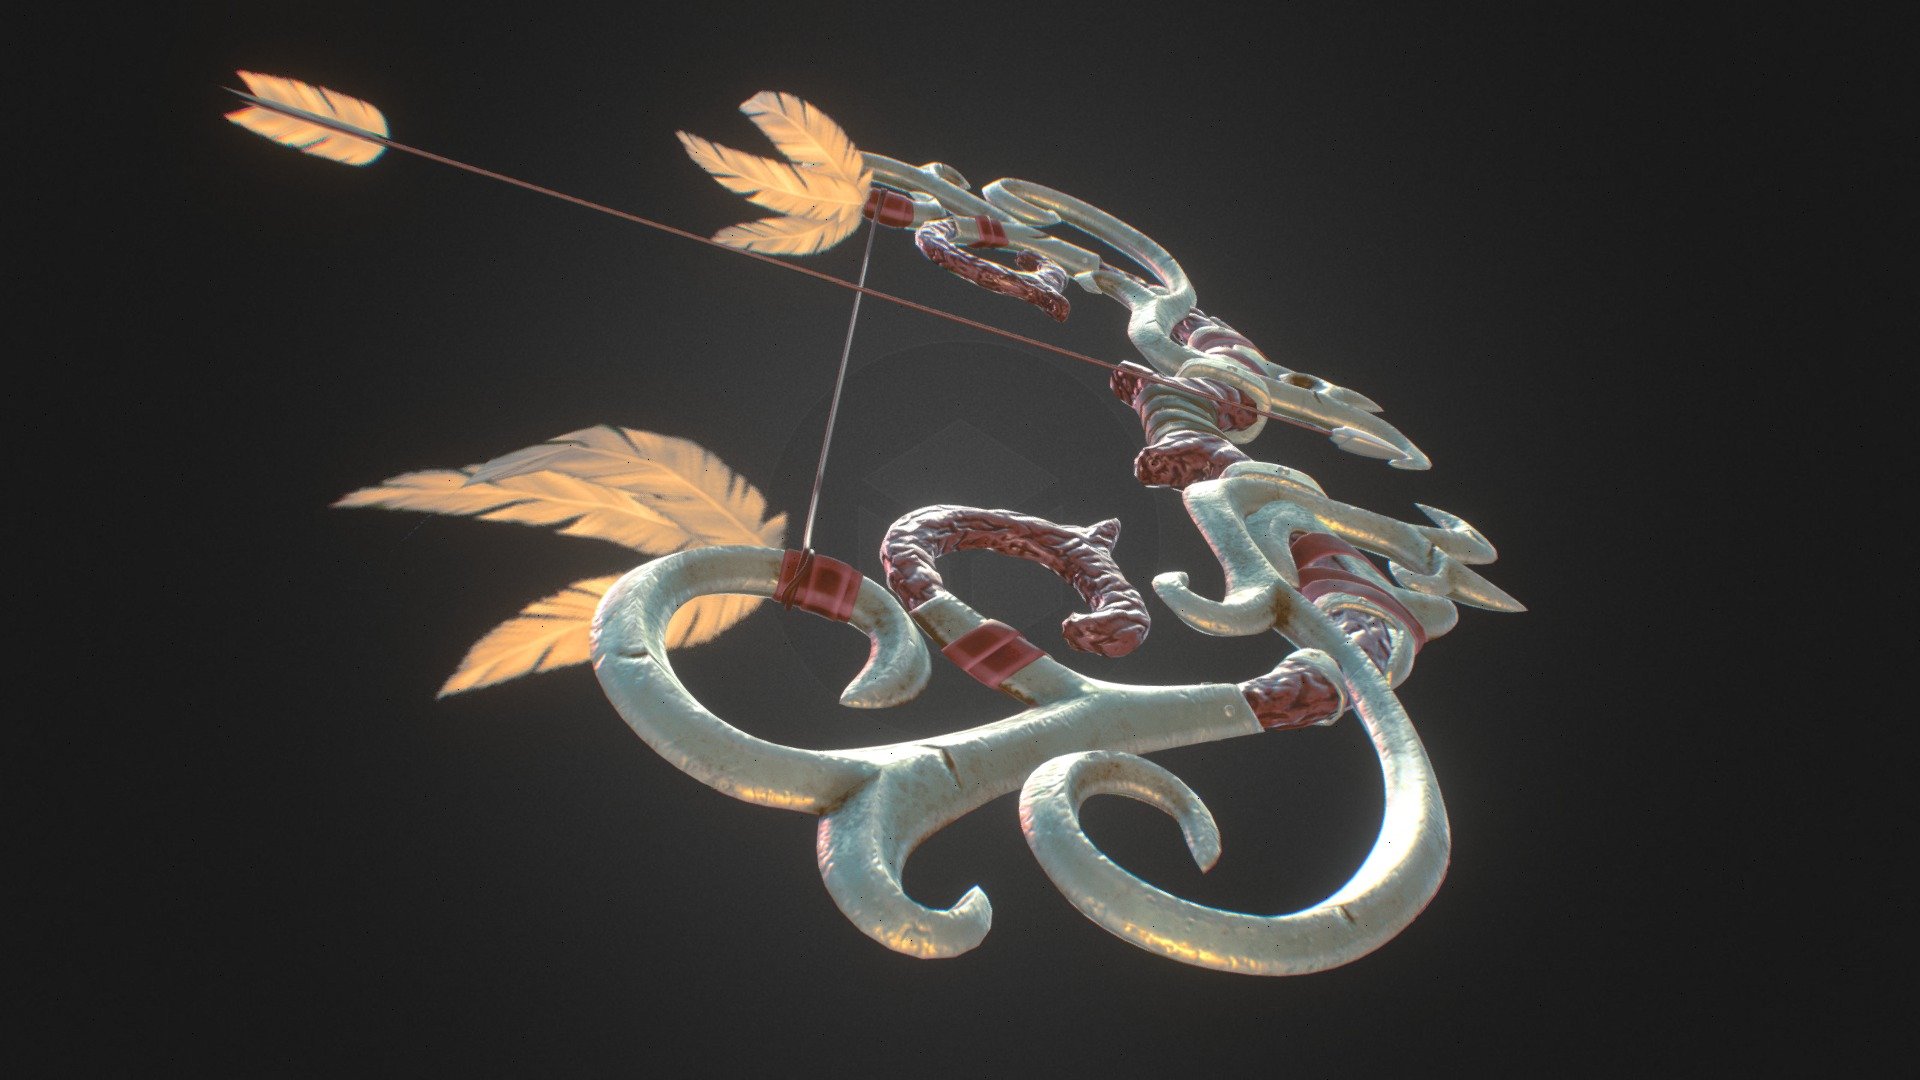 Bow &amp; Arrow 3D model
from Ali Ncir tutorials ❤,
This is the first time I use Substance painter in Baking and texturing the model.
I really recommend this nice course for everyone who wants to create game assets.


My render😉: https://www.instagram.com/p/CFC93yQjTLk/?utm_source=ig_web_copy_link

course link❤: https://www.udemy.com/share/103jKaAkIZdF1bQXo=/ - Bow & Arrow - 3D model by Mohamed Fsili (@medraphc) 3d model